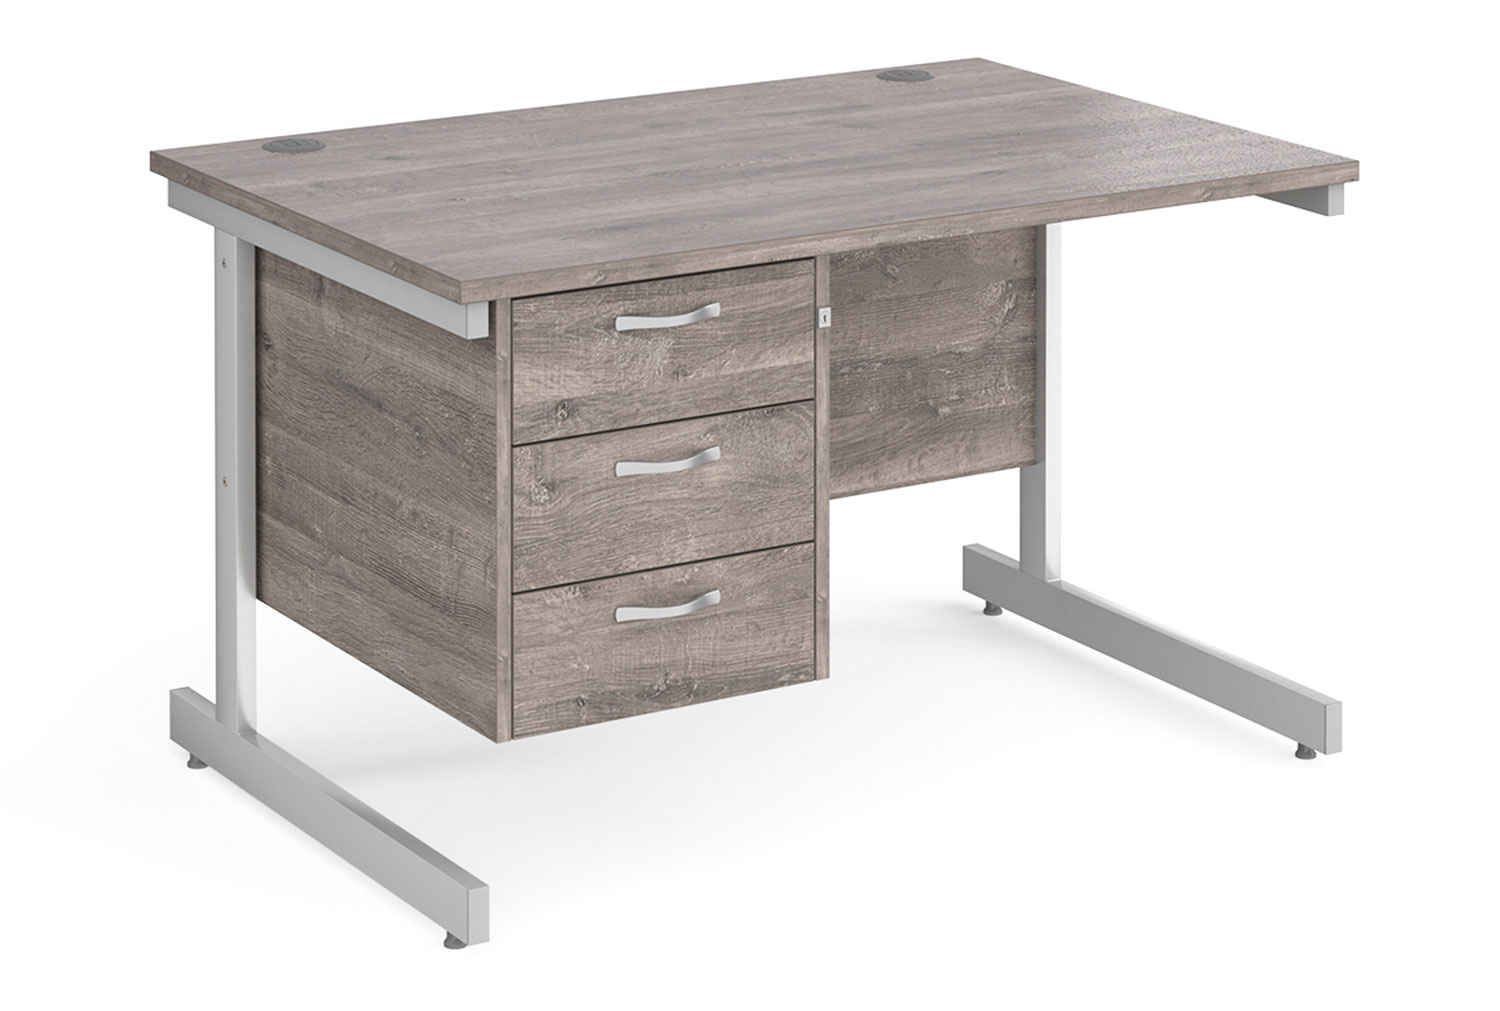 All Grey Oak C-Leg Clerical Office Desk 3 Drawer, 120wx80dx73h (cm), Express Delivery